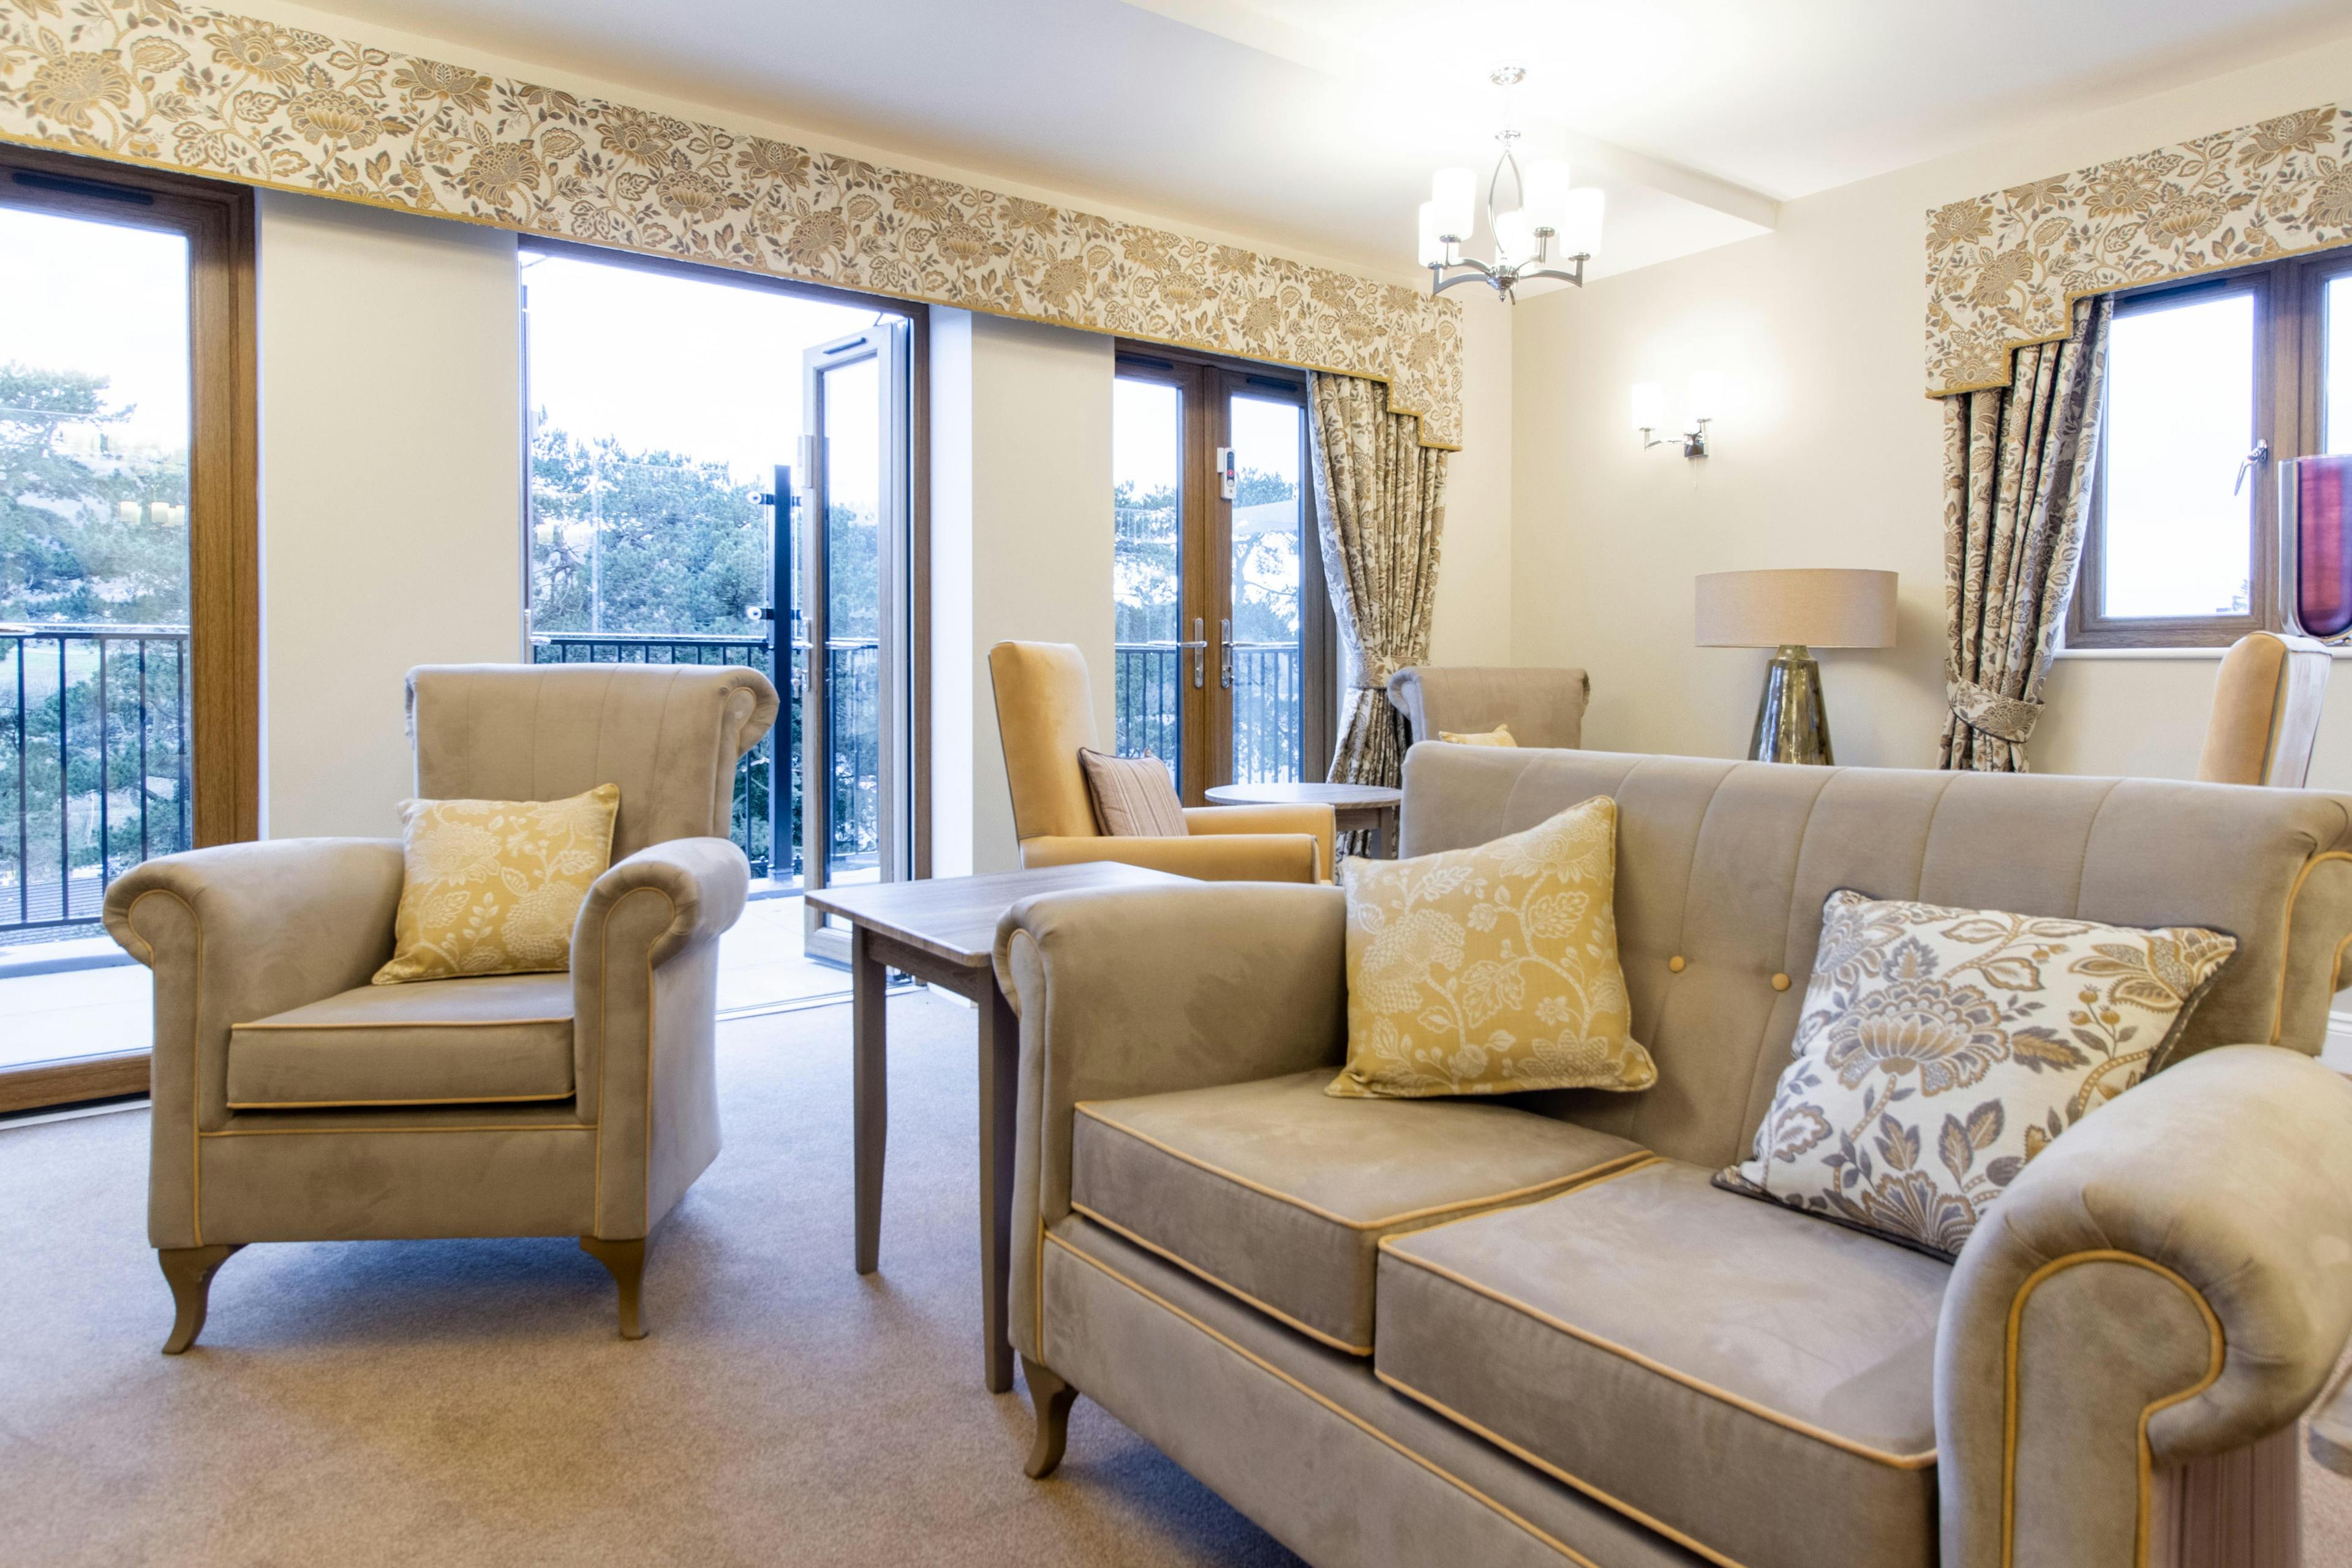 Communal Lounge at The Hollies Care Home in Dursley, Gloucestershire